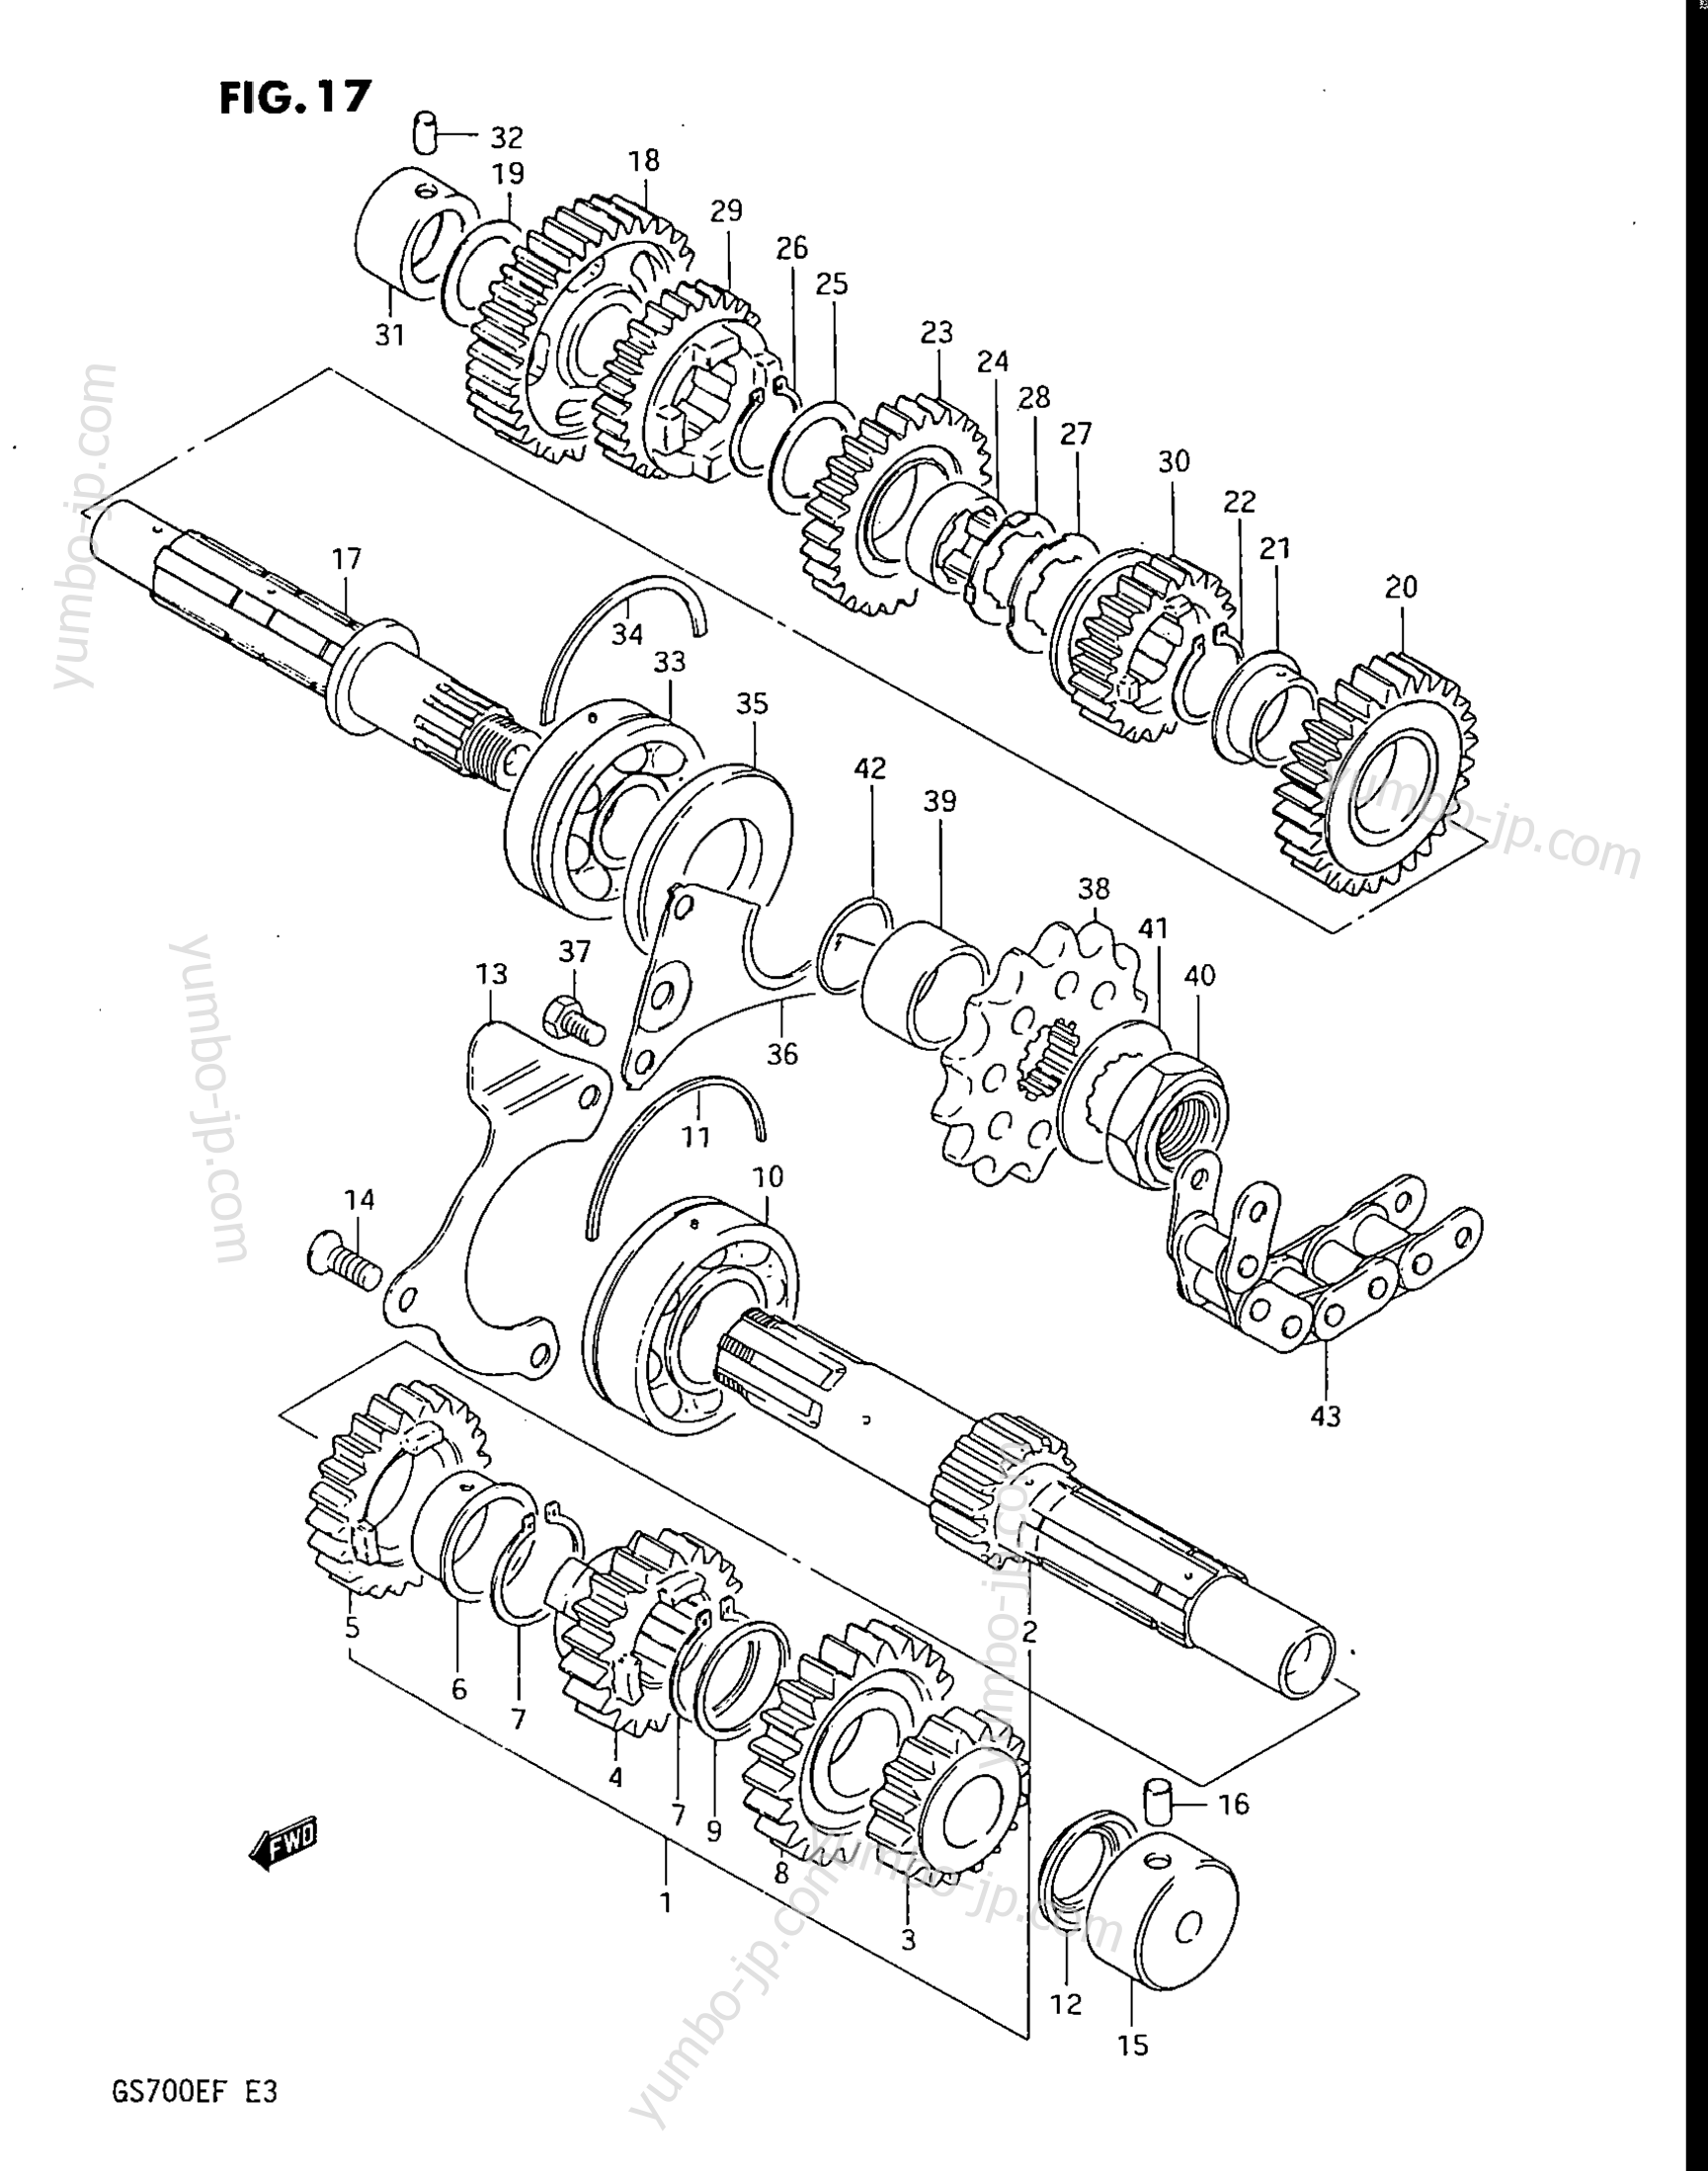 TRANSMISSION for motorcycles SUZUKI ES, (GS700E) 1985 year